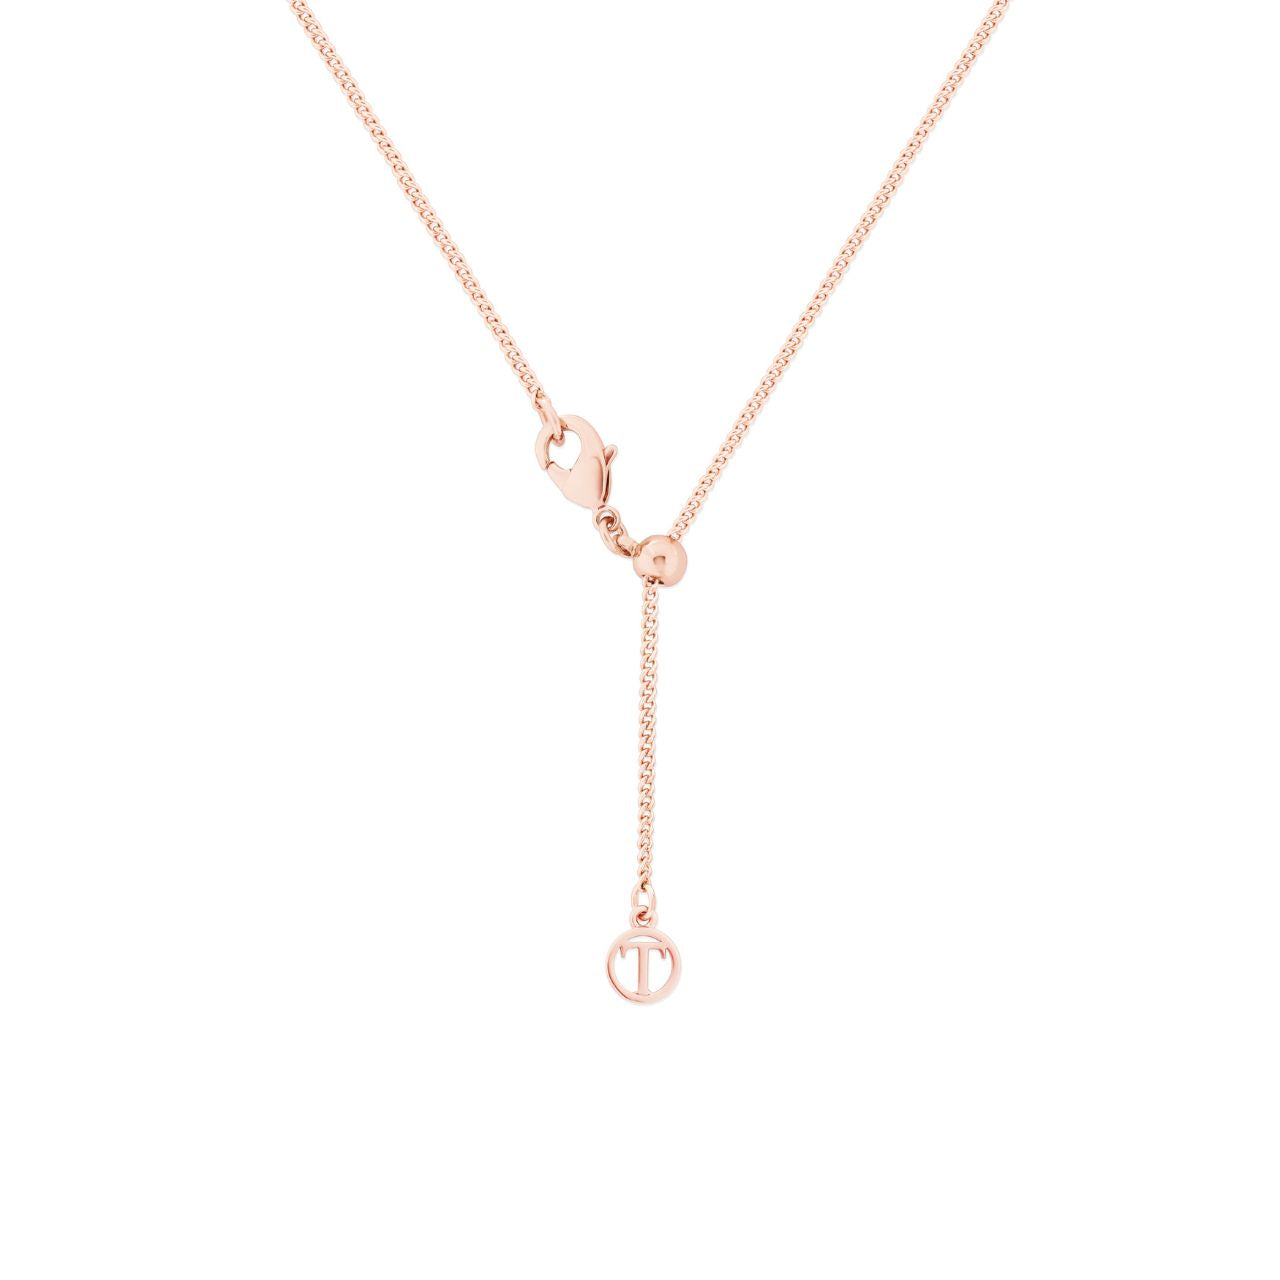 "Like A Feather" Rose Gold Necklace by Tipperary  This stylish piece by Tipperary features a delicate "Like A Feather" Rose Gold Necklace. Crafted of high-quality, its understated design will add a touch of class to any outfit.